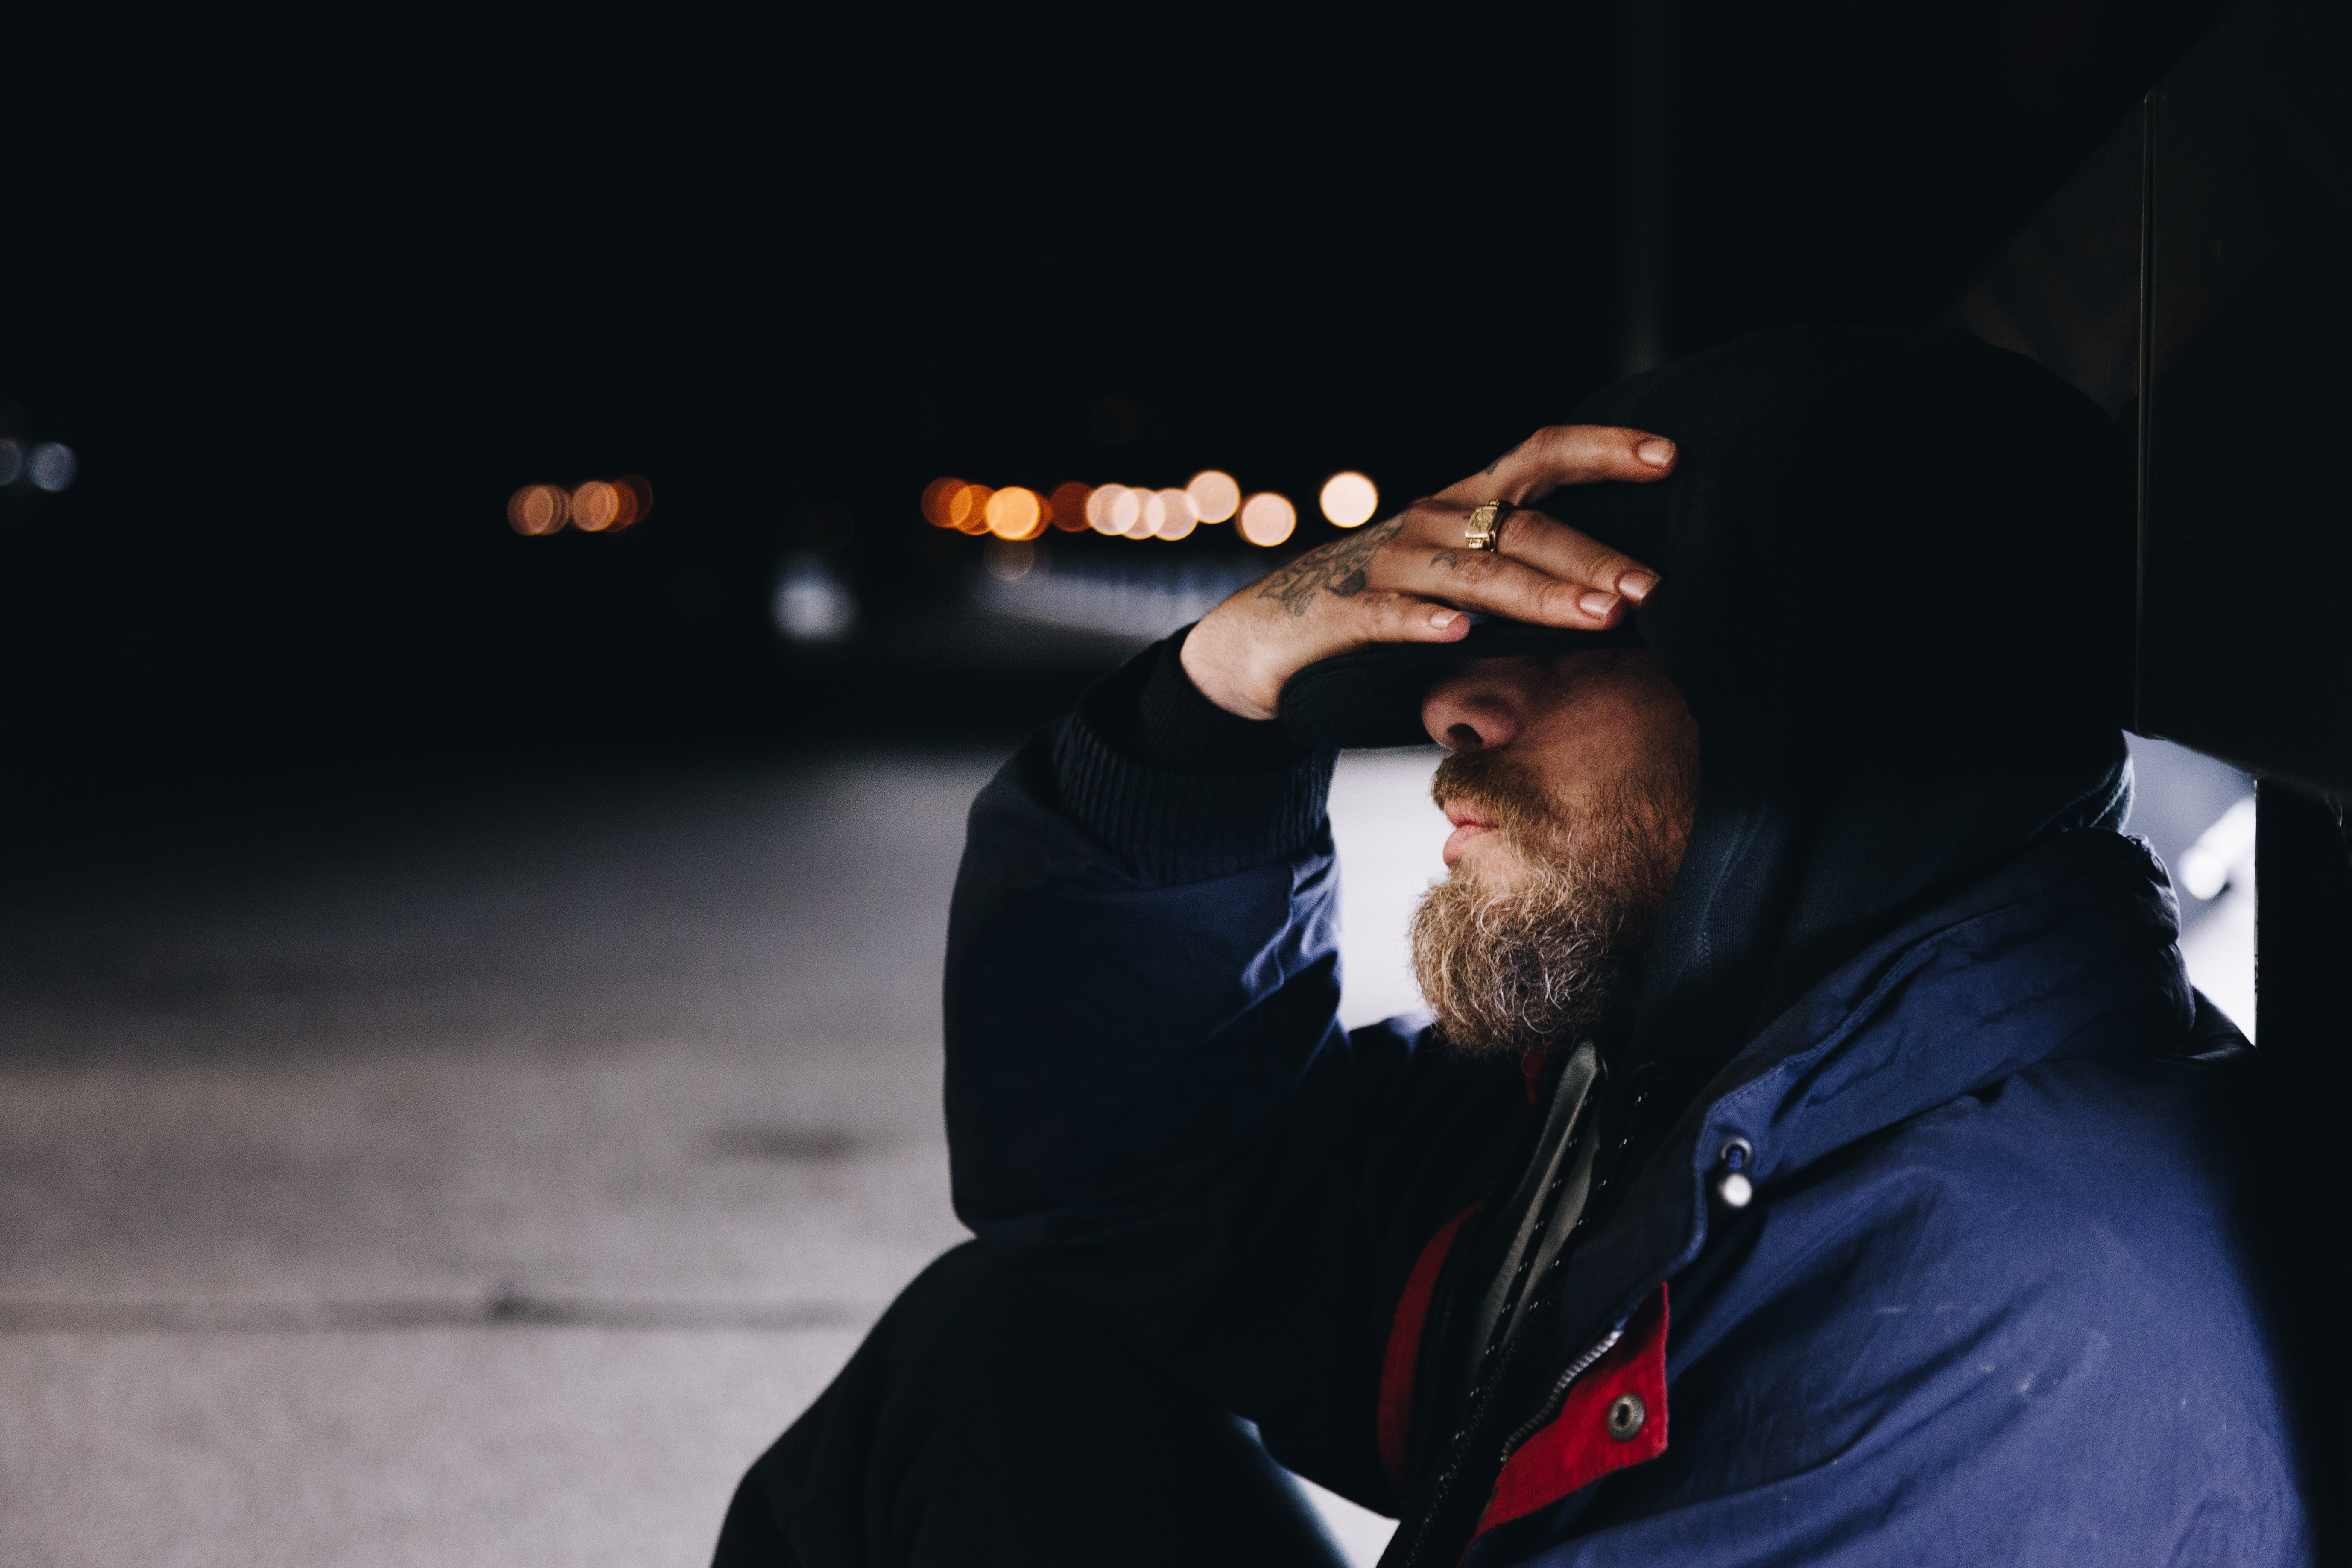 Aaron collapsed due to the cold | Photo: Unsplash